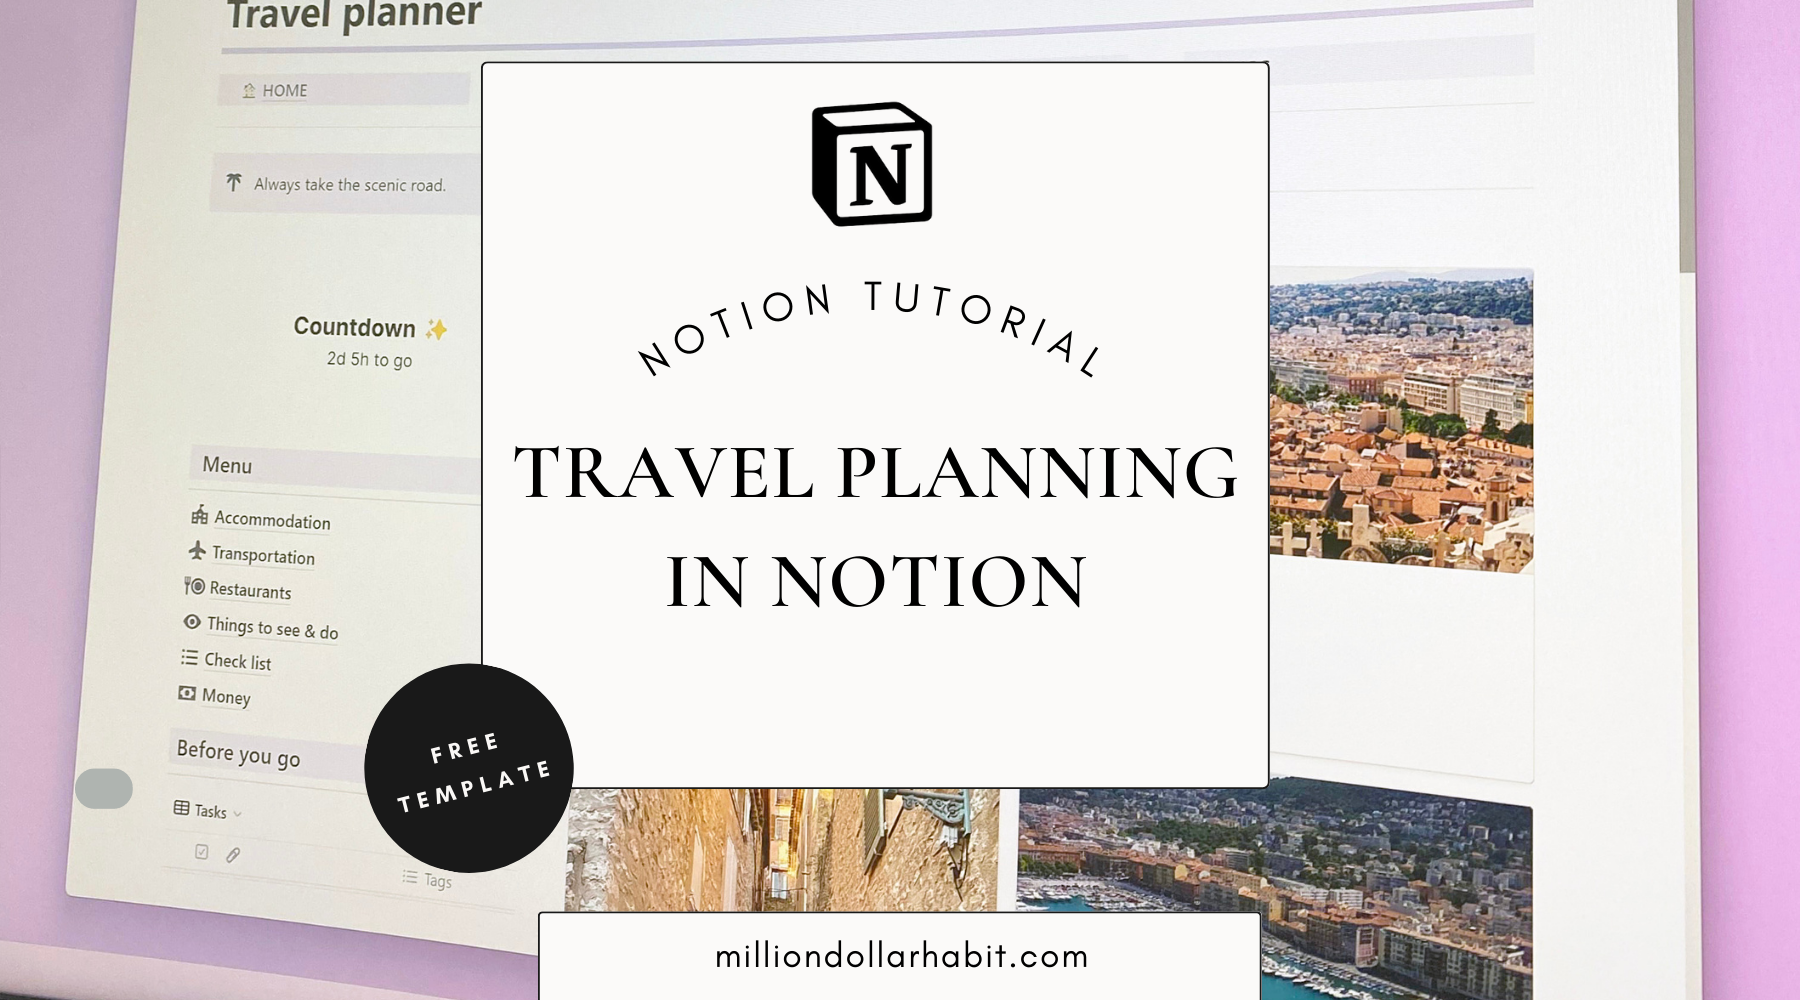 Notion Travel Planner How to plan your trip in Notion (FREE template